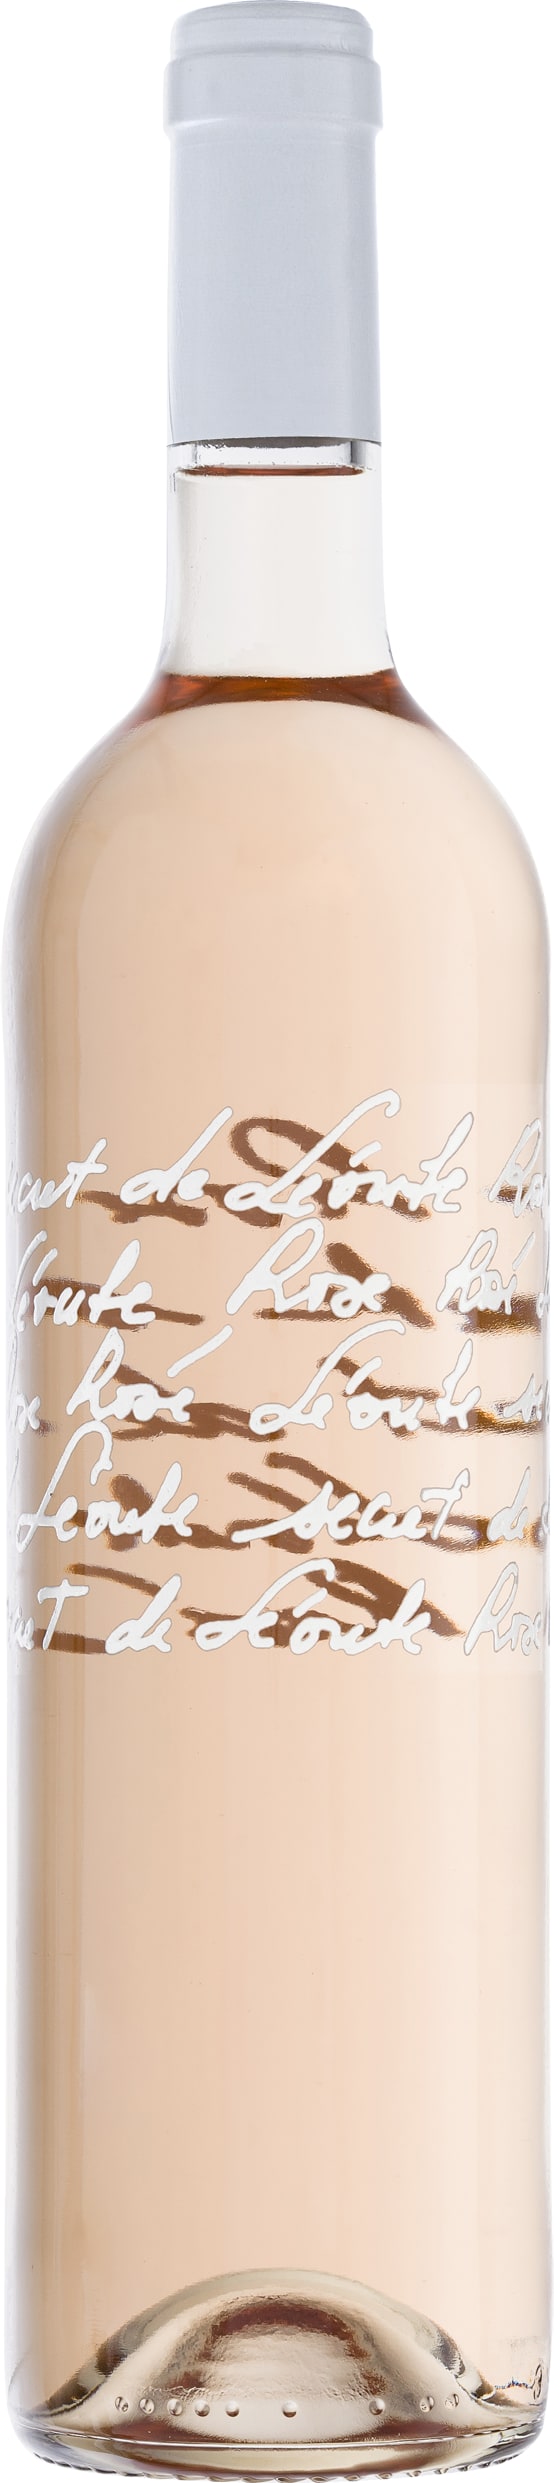 Chateau Leoube Secret de Leoube Organic Rose 2022 75cl - Buy Chateau Leoube Wines from GREAT WINES DIRECT wine shop